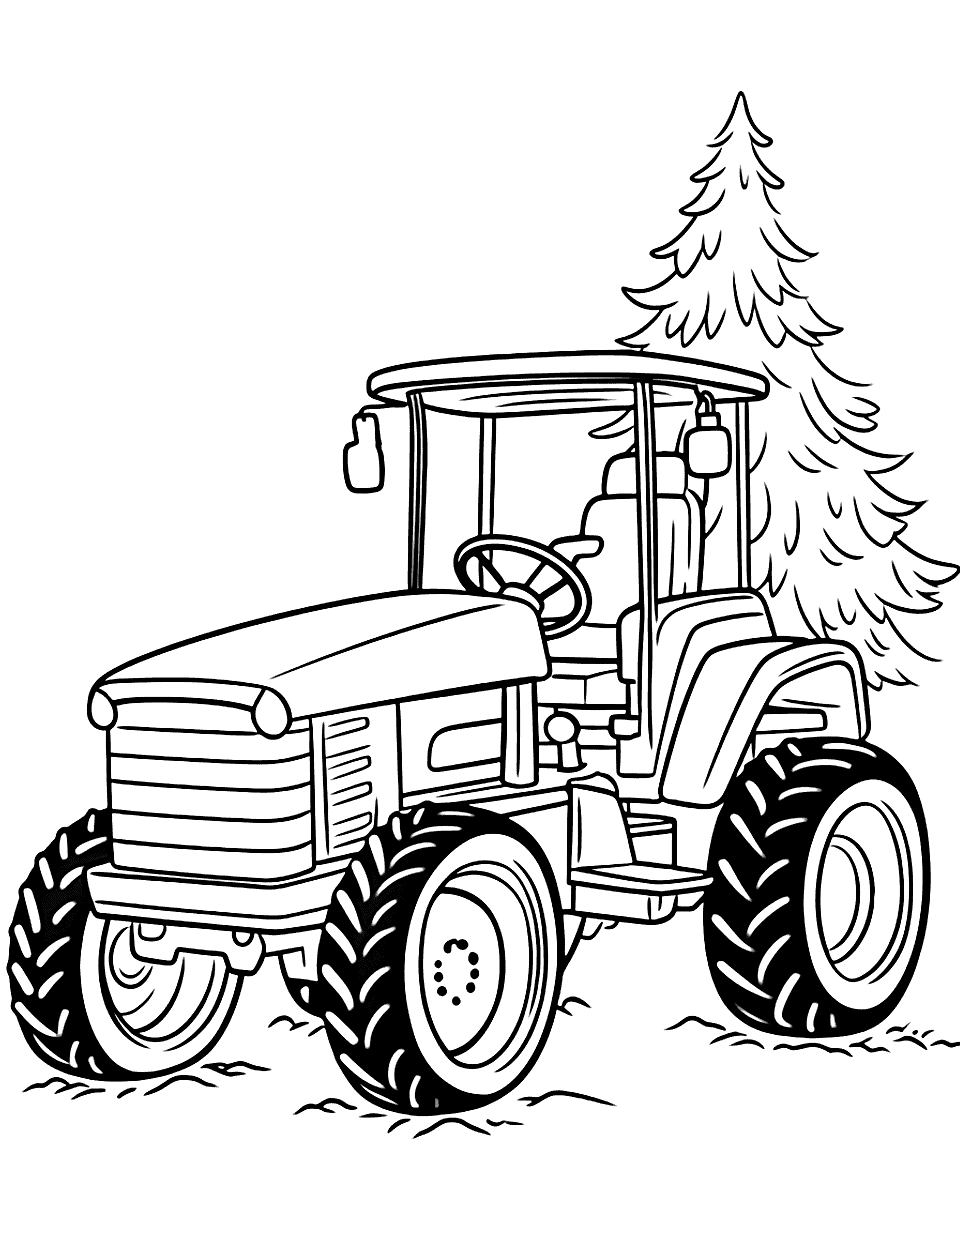 Tractor and a Christmas Tree Coloring Page - A festive scene with a tractor carrying a freshly cut Christmas tree.